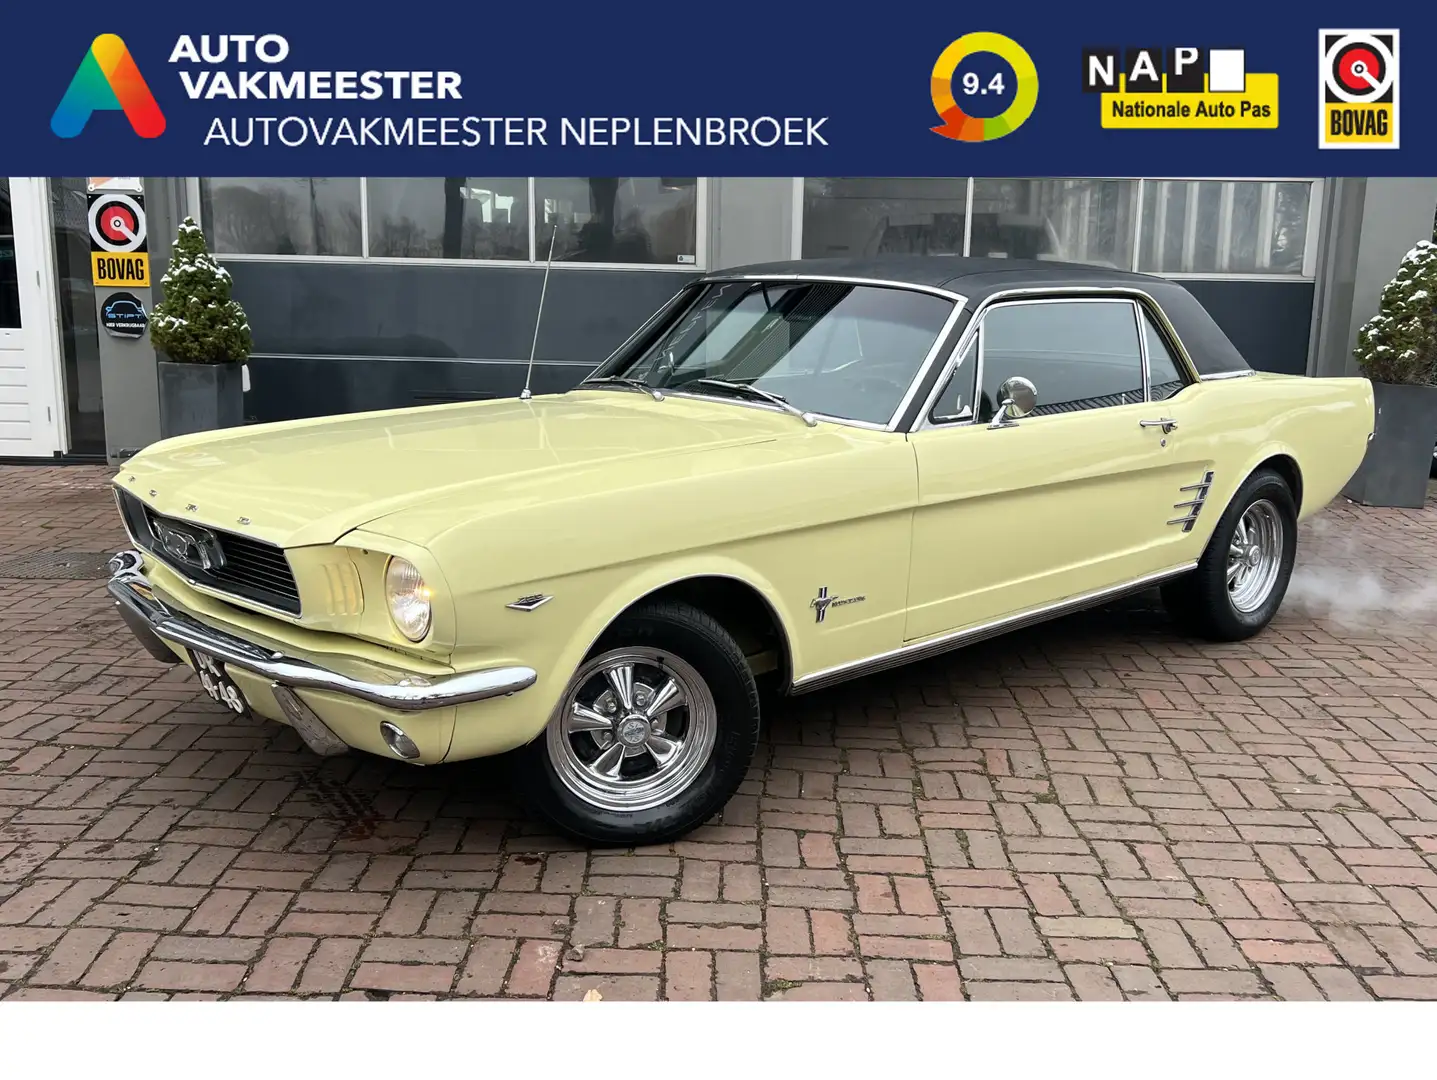 Ford Mustang USA 4.6 V8 LPG GT 289 Bj 1966 TOP STAAT 301PK !! m Beżowy - 1